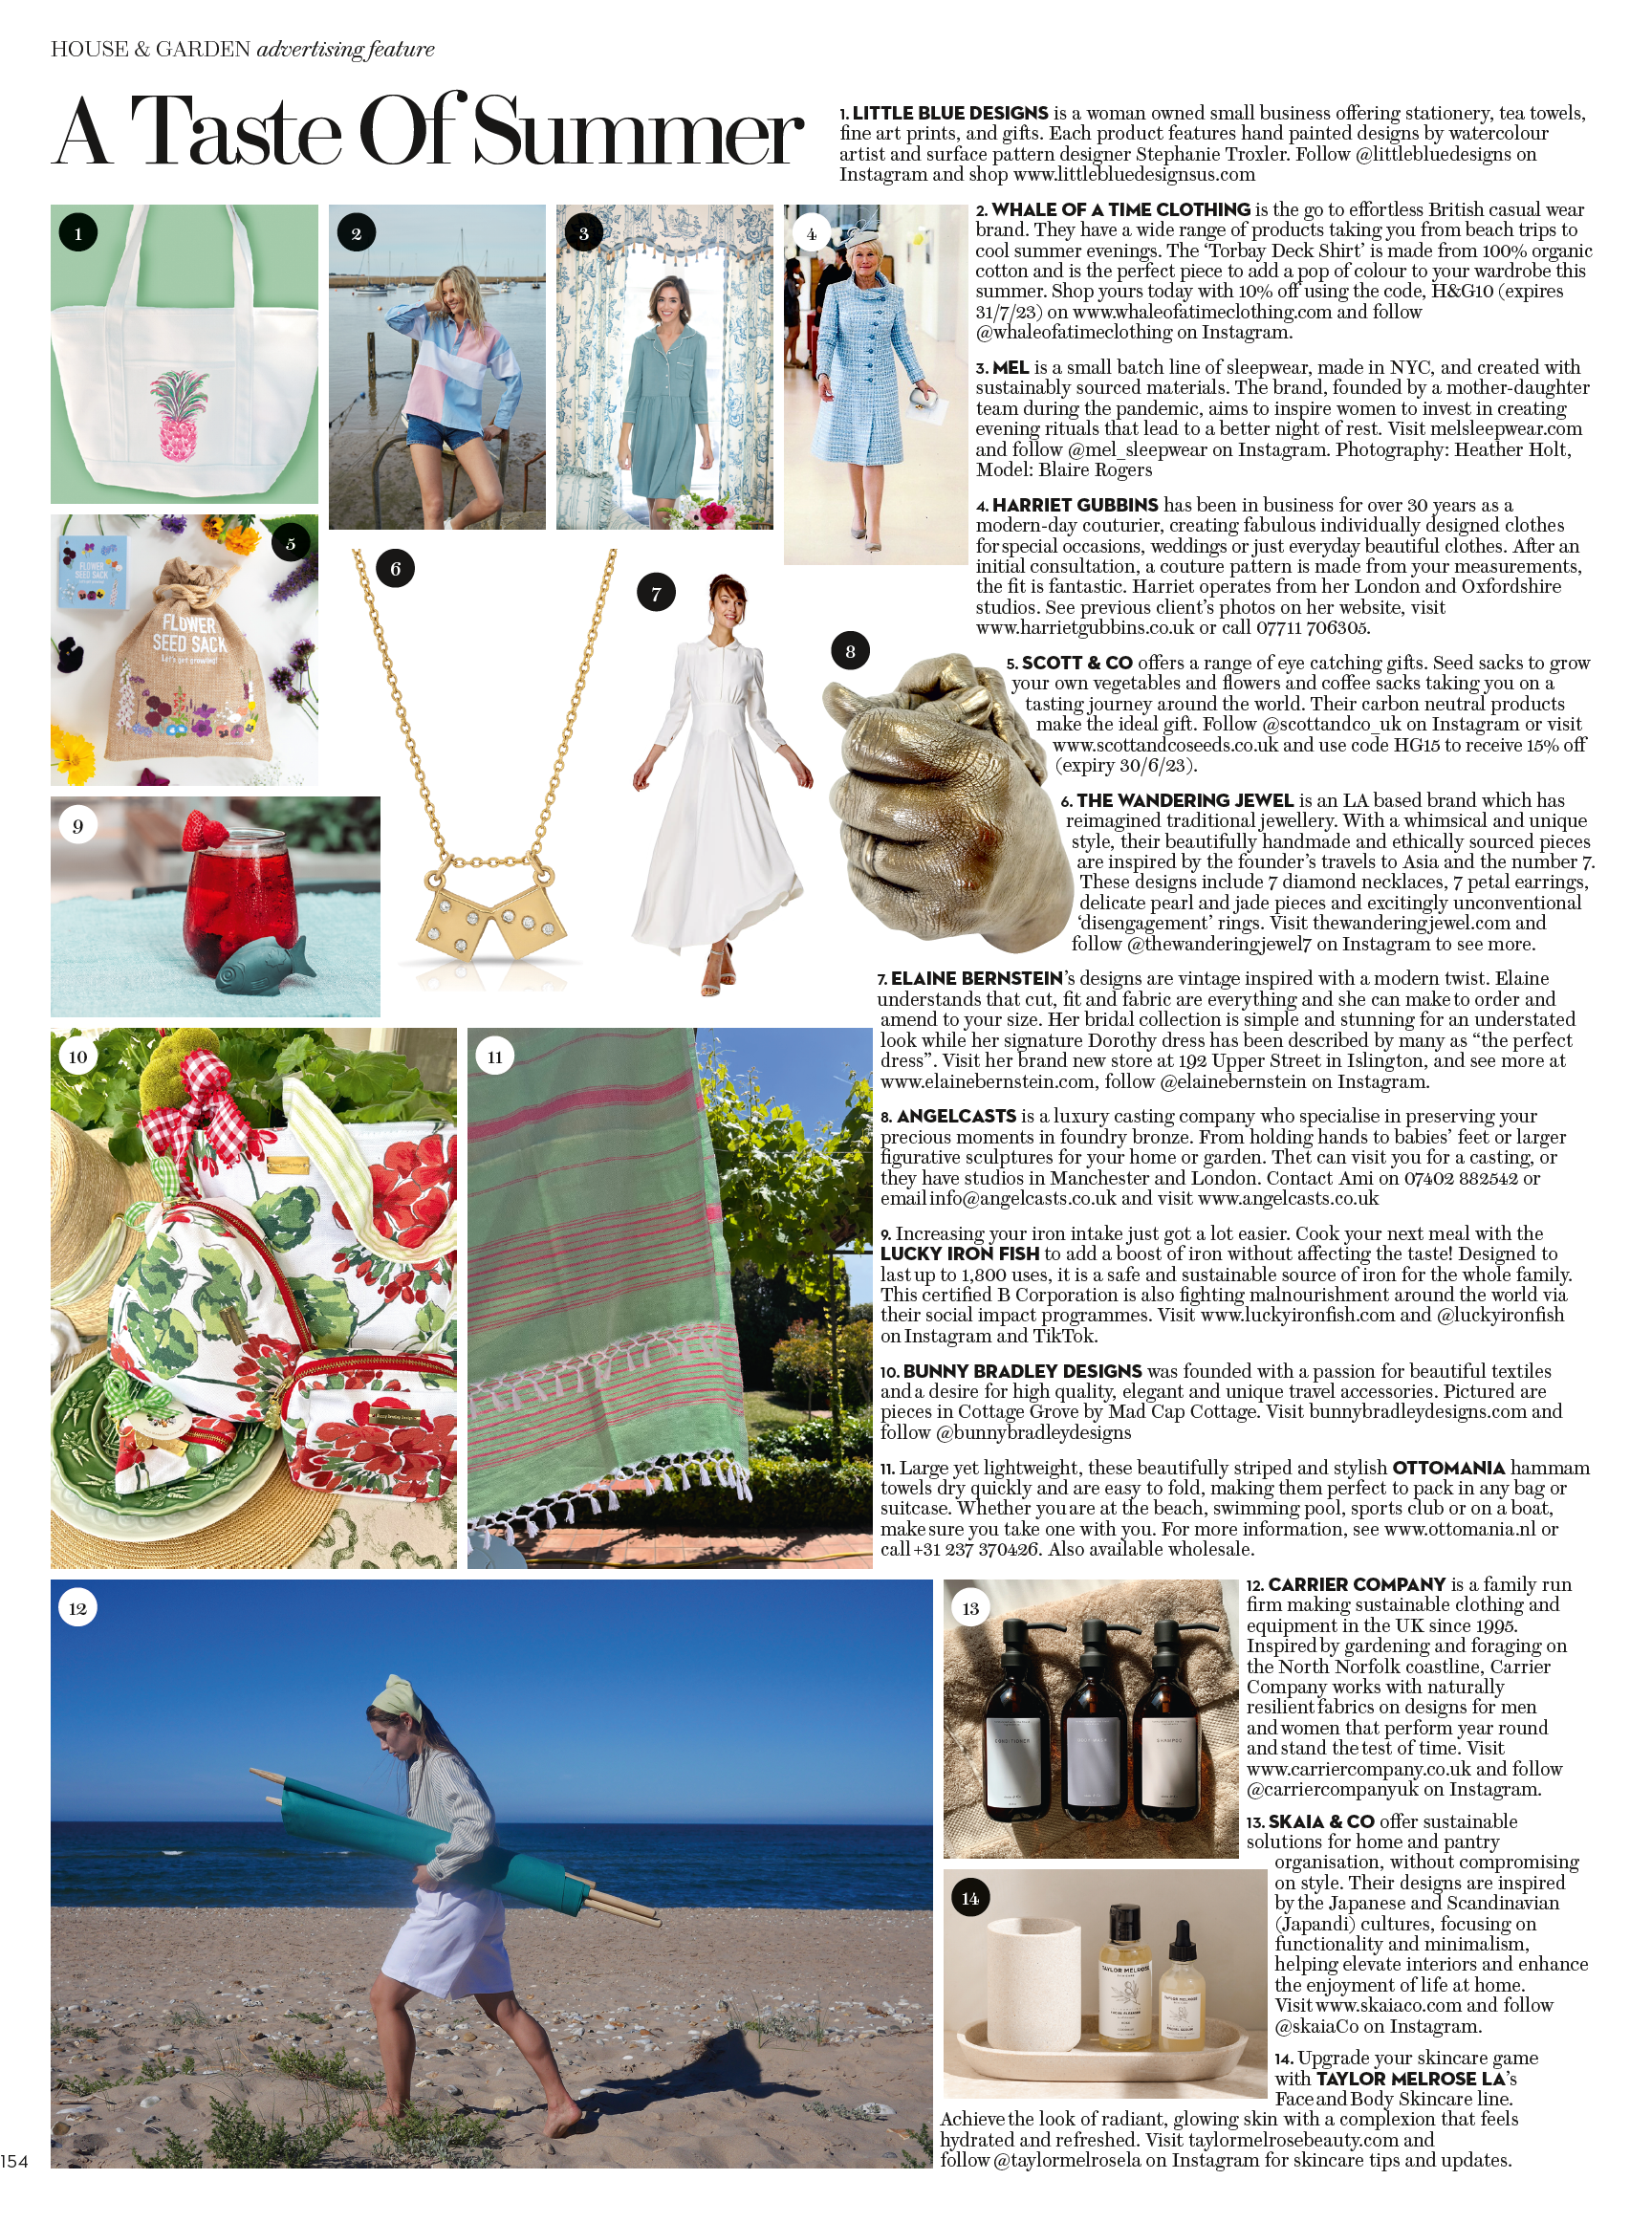 house and garden article taste of summer featuring the dice ladyluck necklace from the wandering jewel